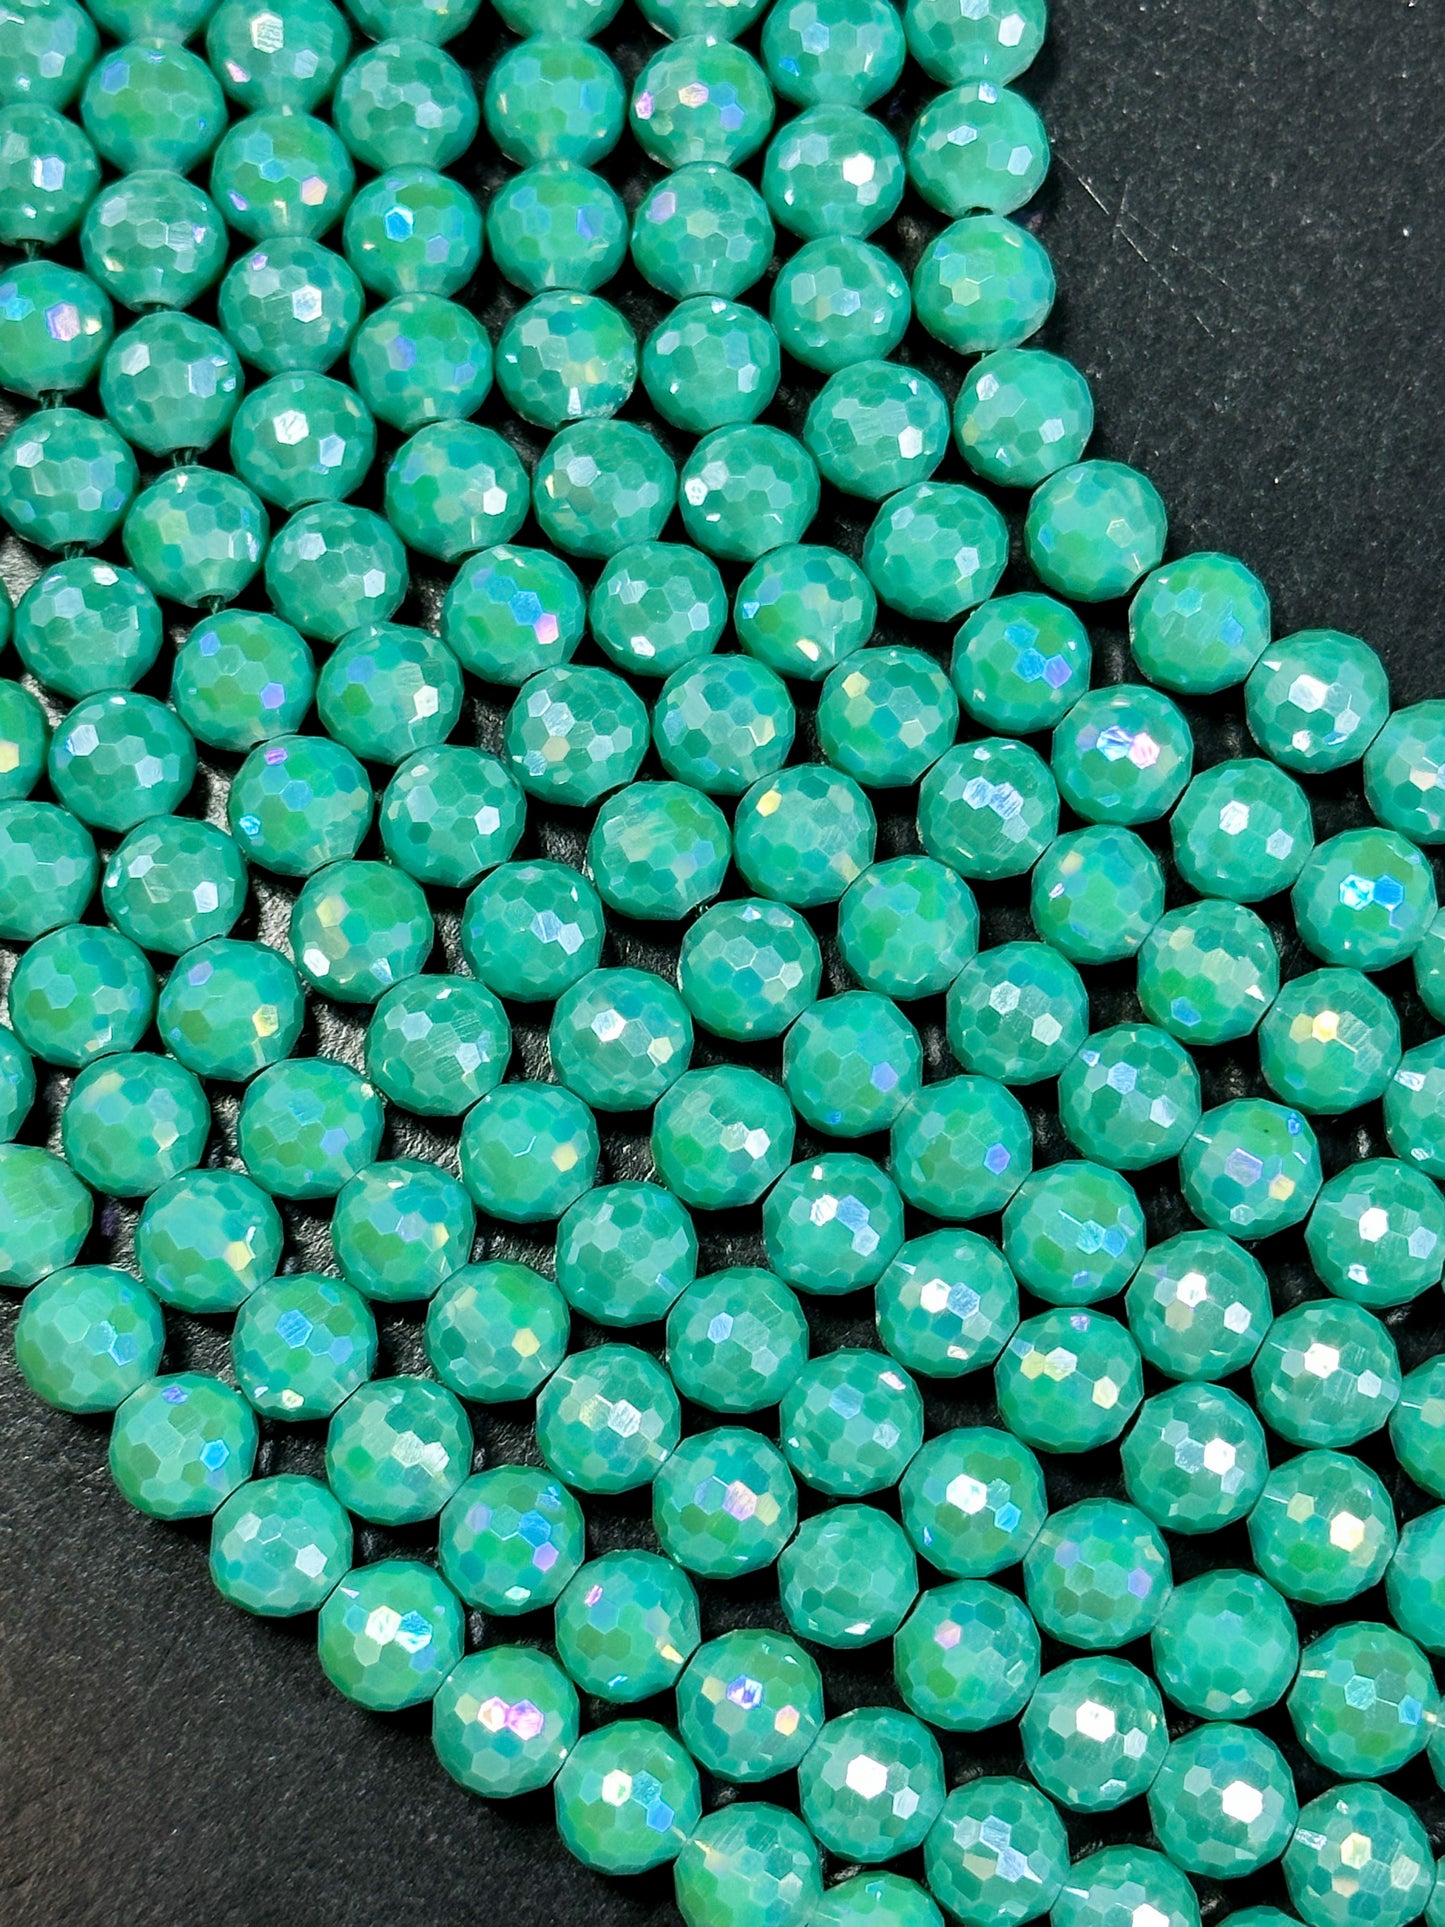 Beautiful Mystic Chinese Crystal Glass Bead Faceted 8mm Round Bead, Gorgeous Iridescent Teal Green Color Crystal Bead, Great Quality Glass